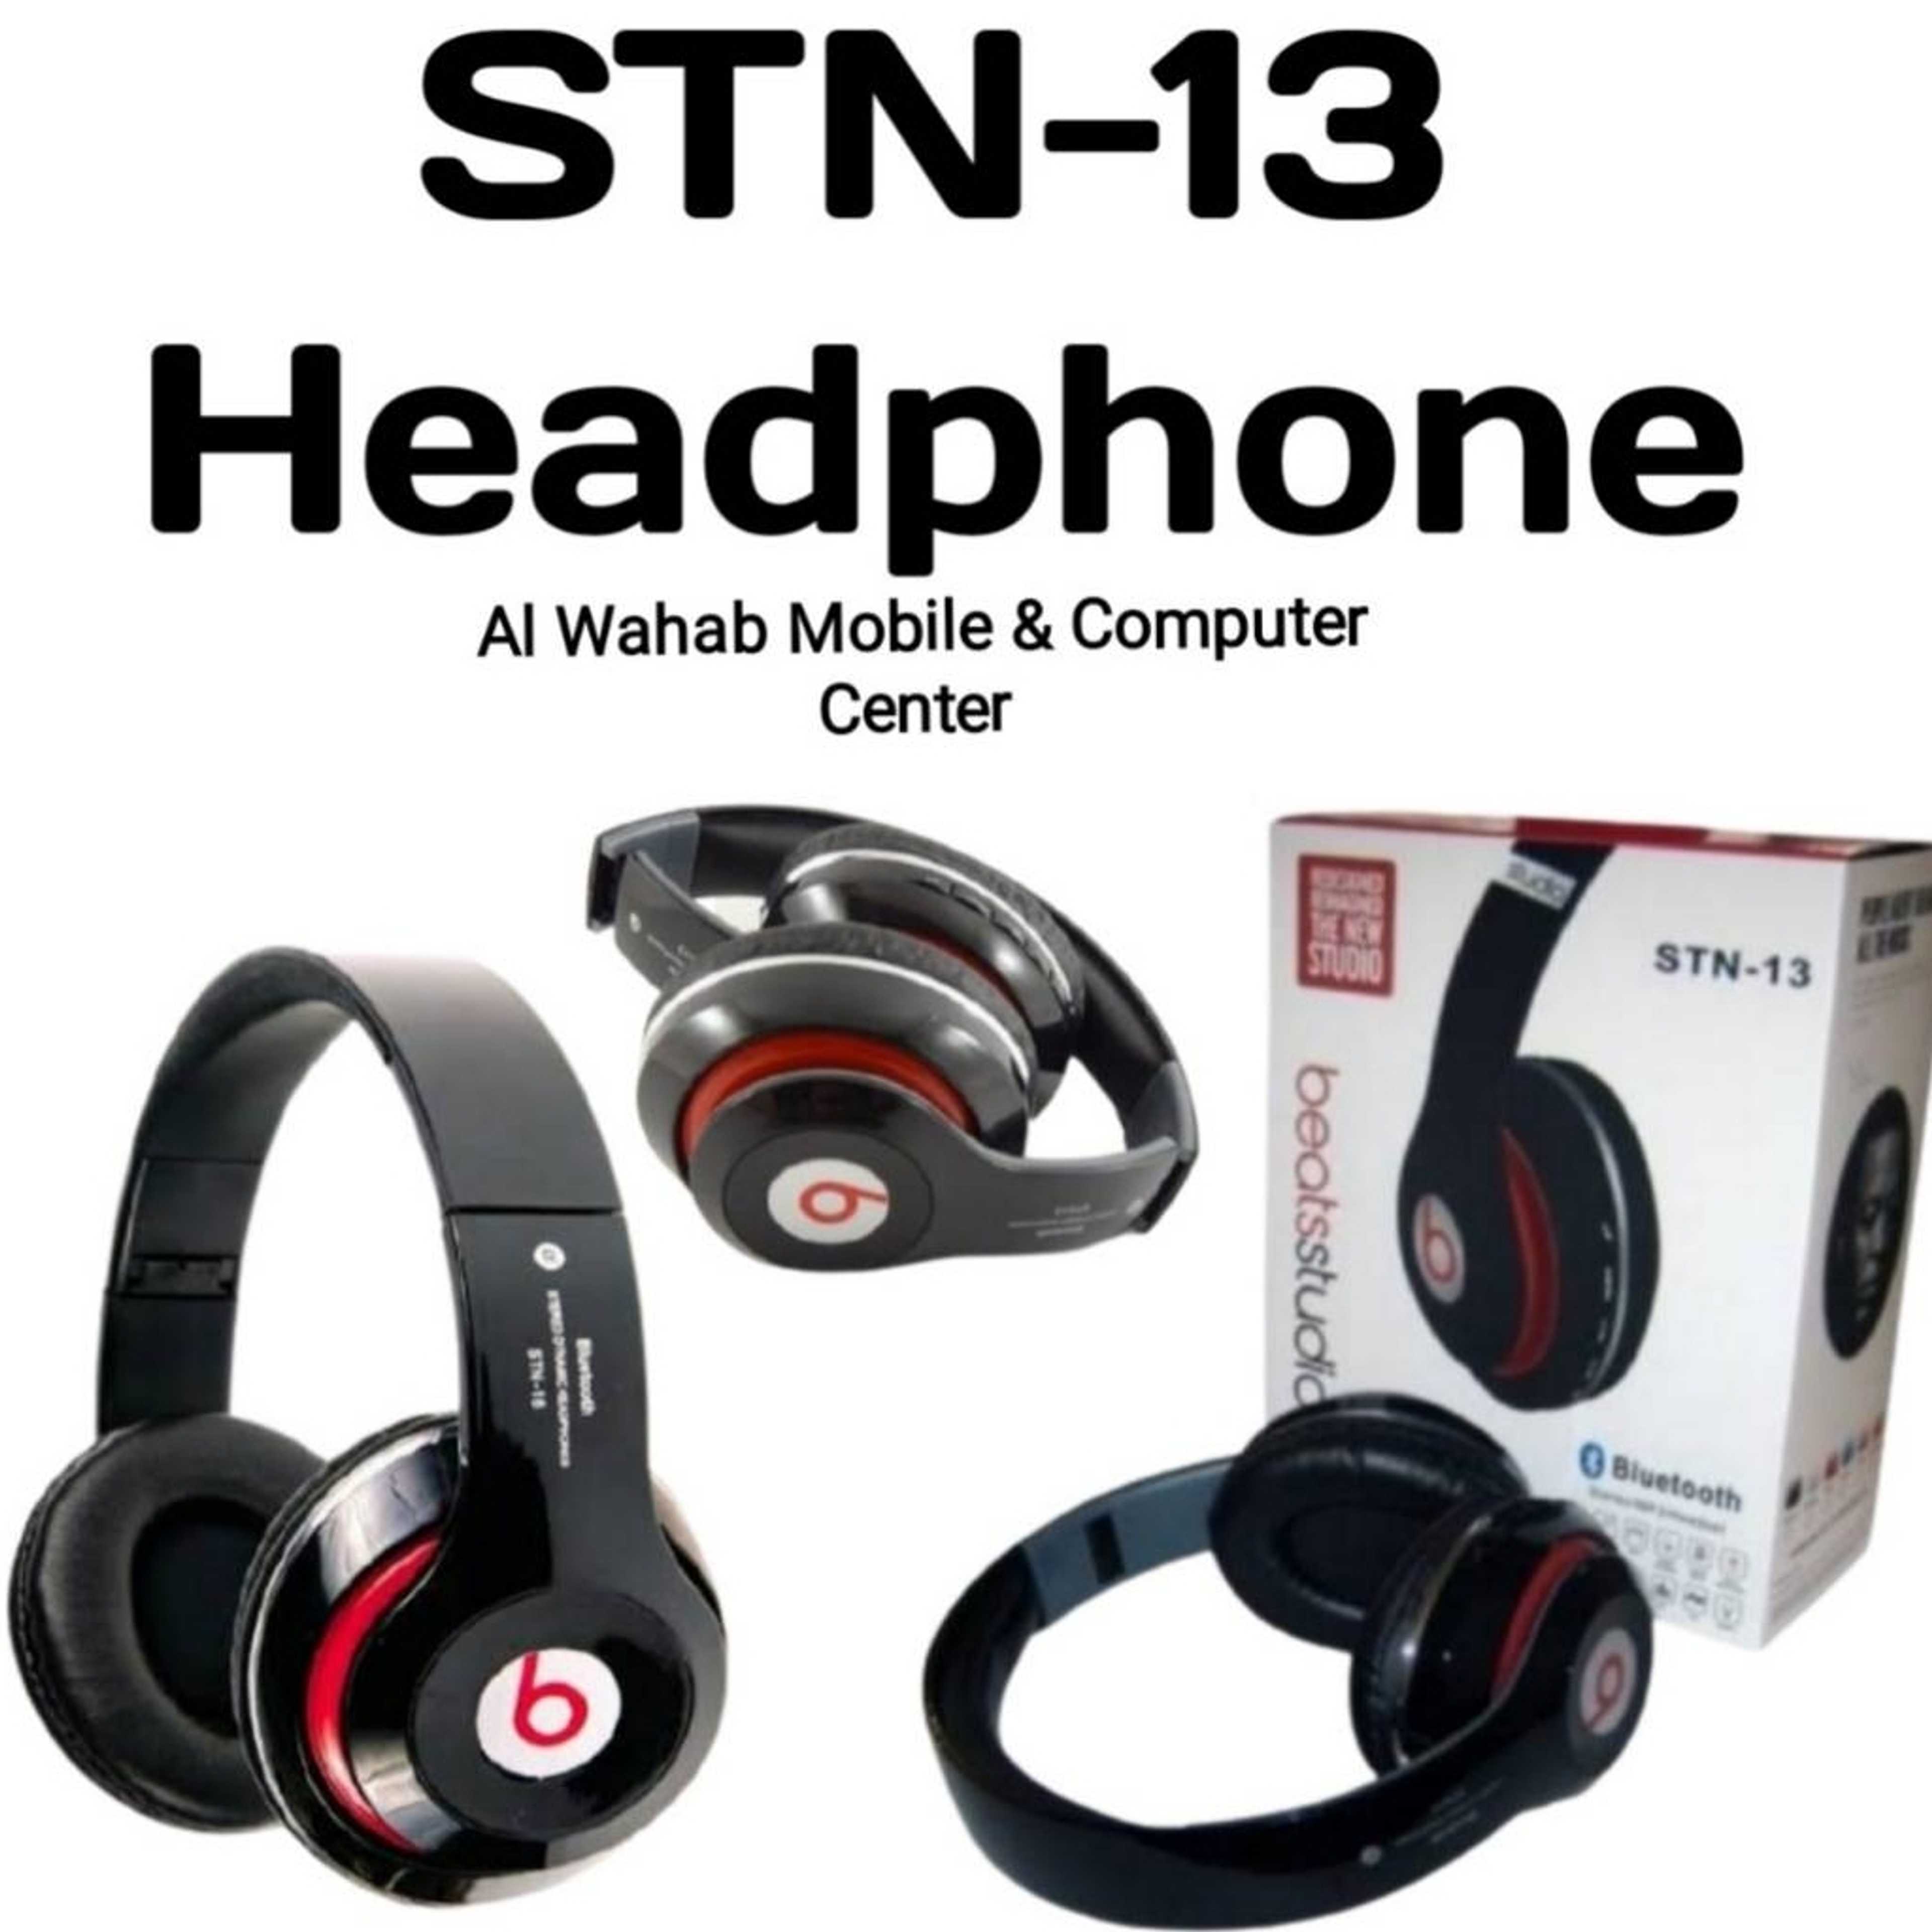 STN-13 Bluetooth Wireless Headphone Casque Audio Portable Headset Stereo Built-in Mic Support TF Card FM Radio